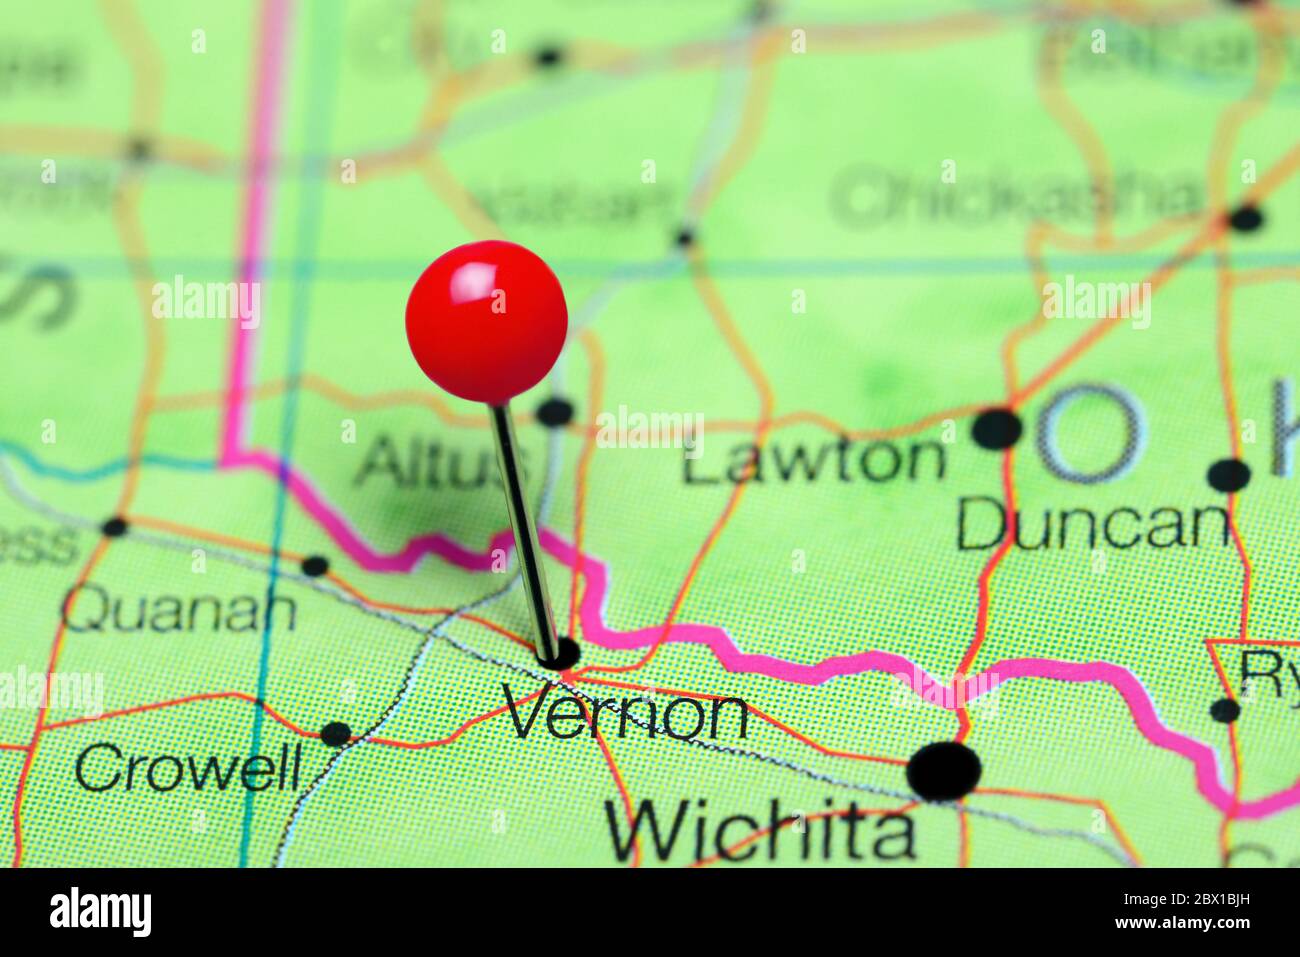 Vernon pinned on a map of Texas, USA Stock Photo